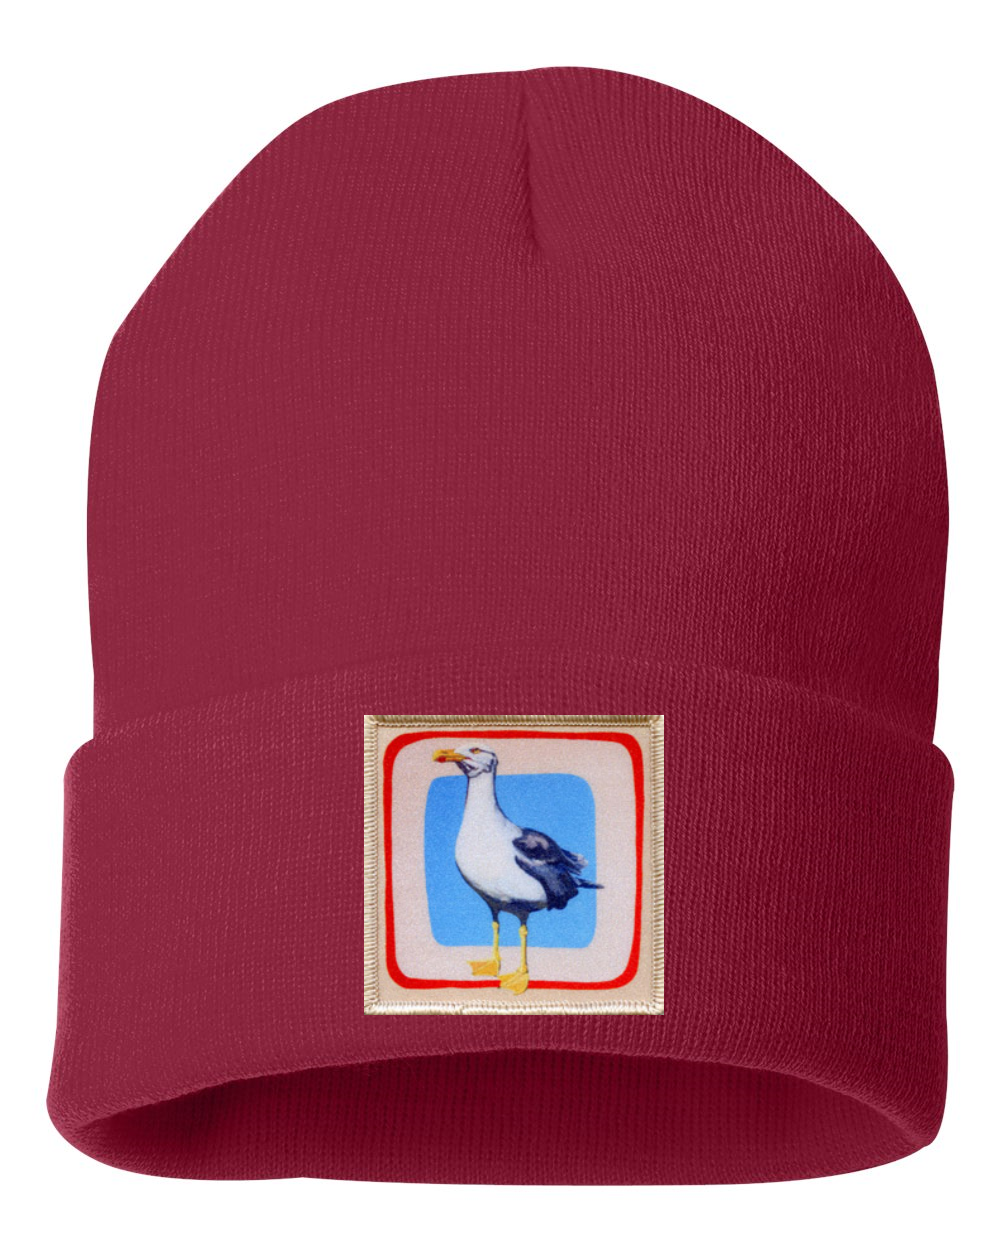 Seagull Hats FlynHats Cardinal Red  